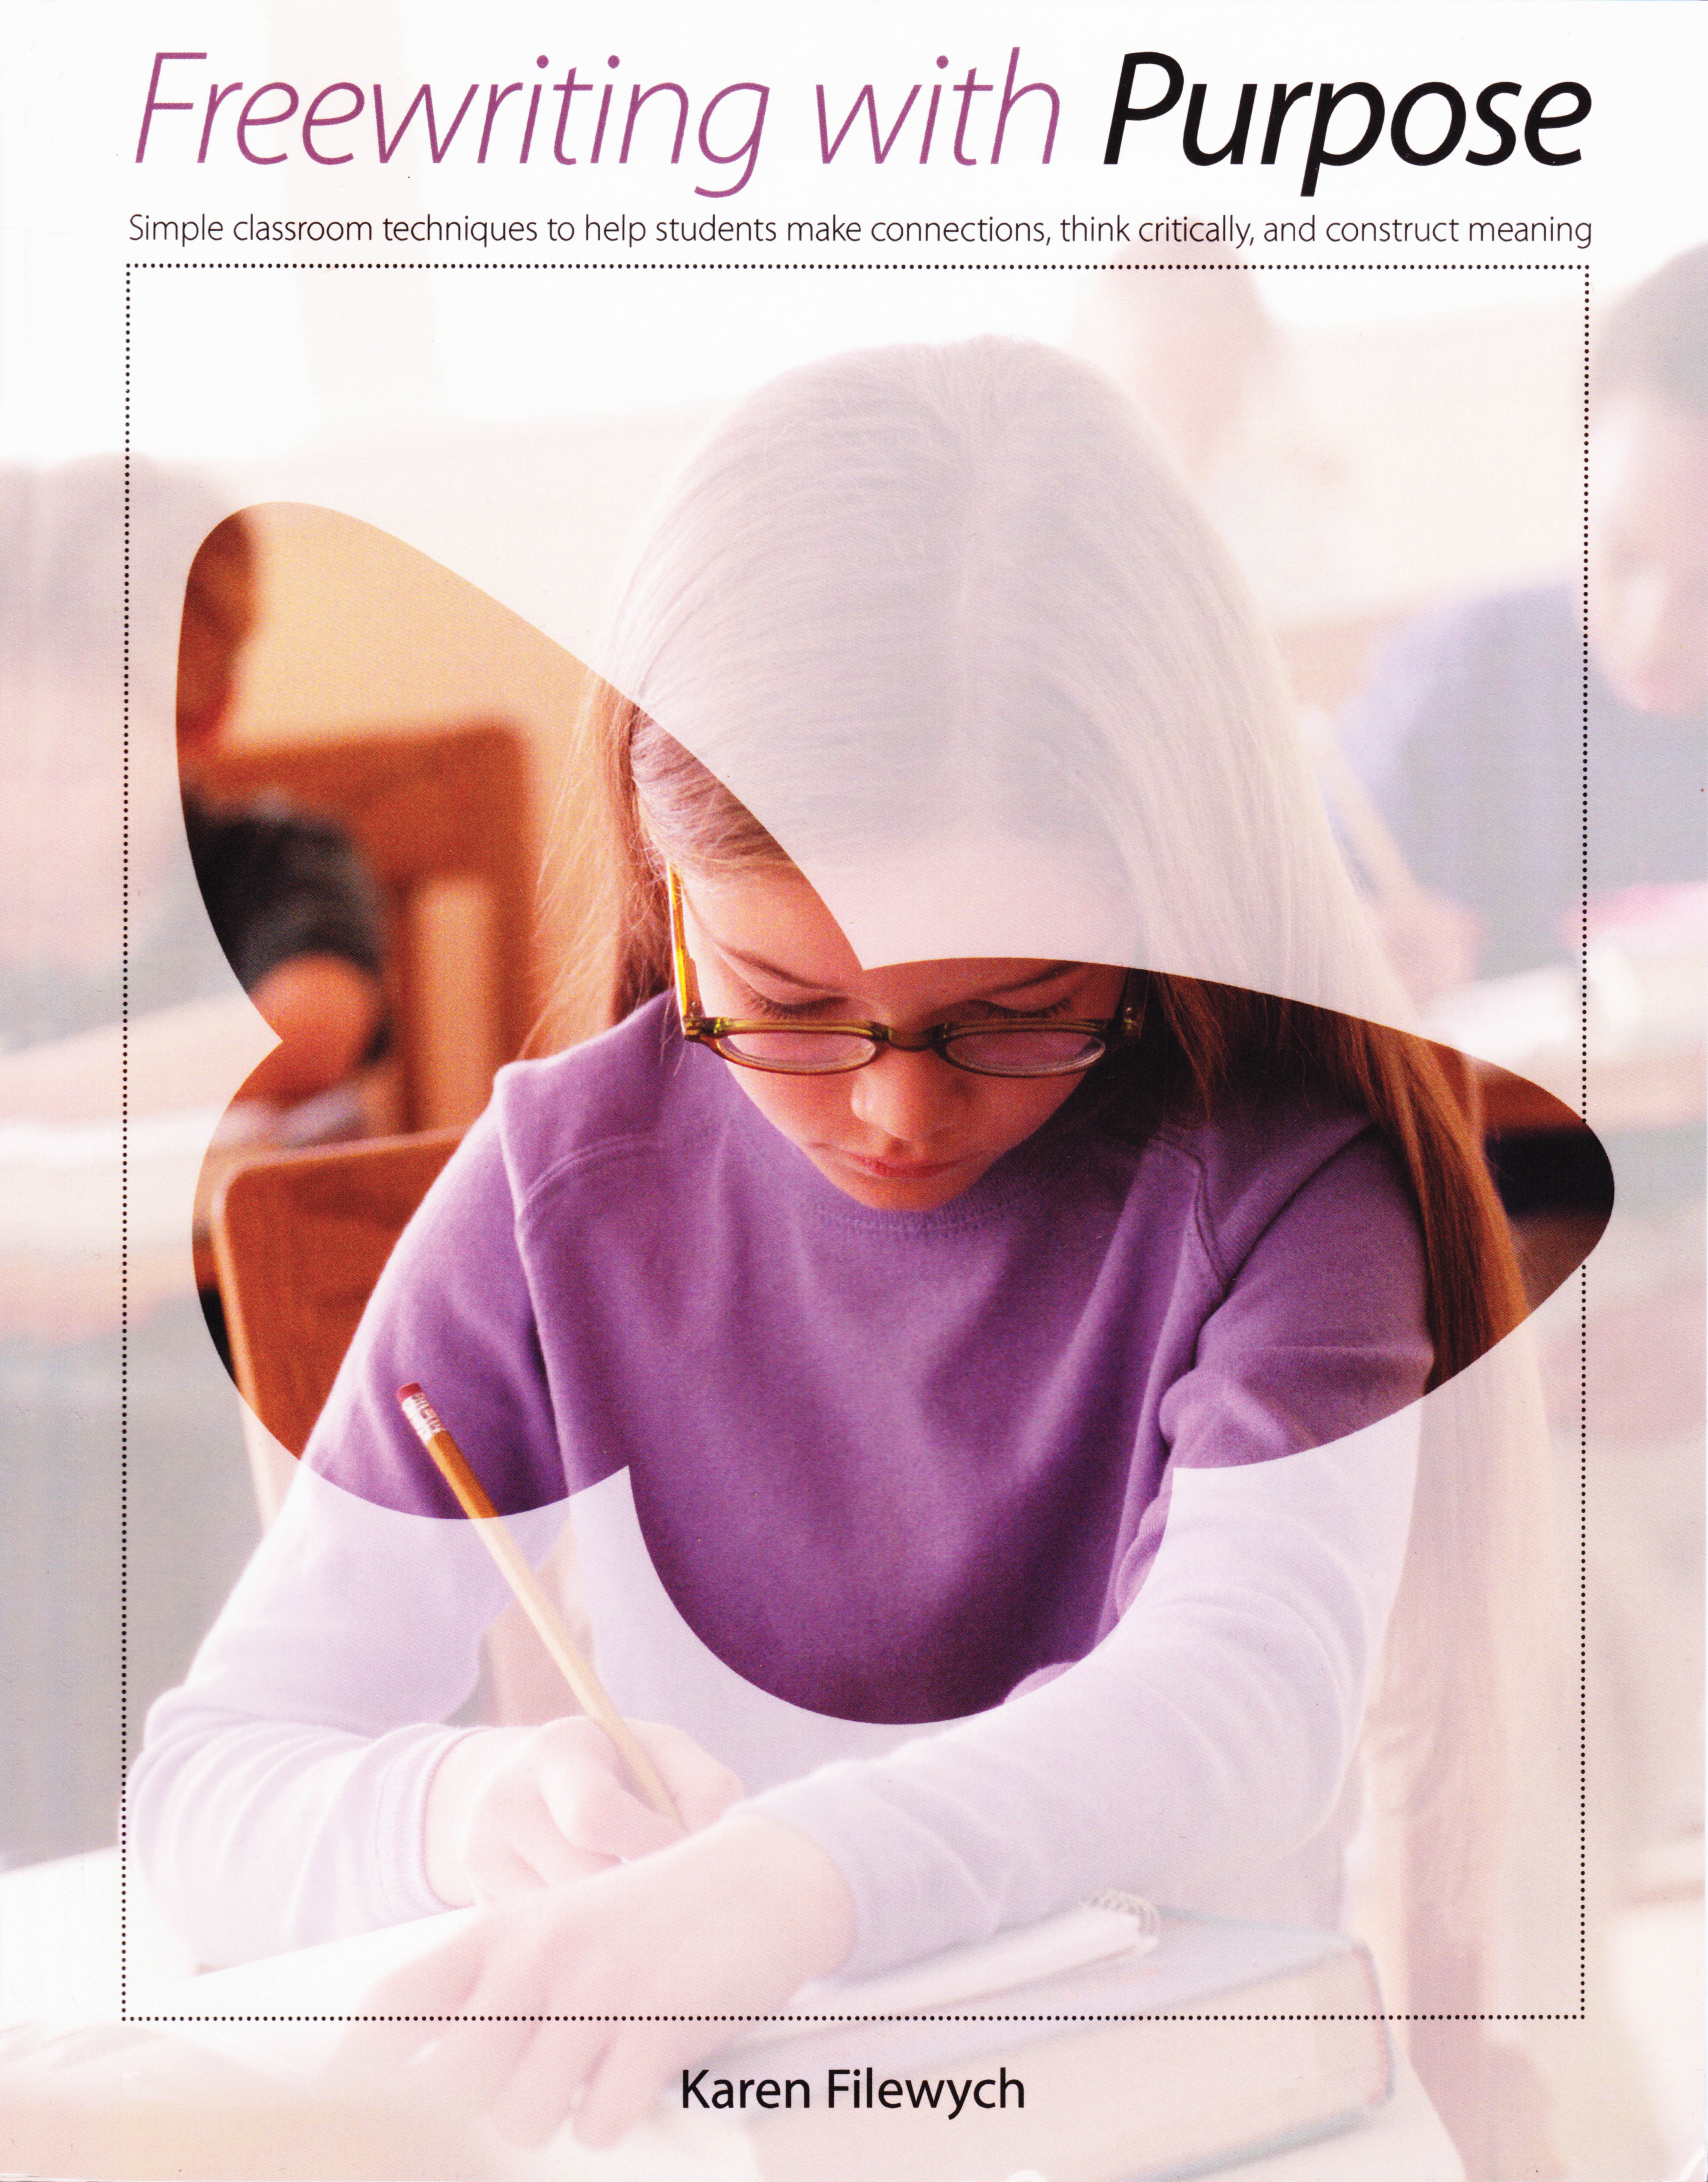 Photo of a book cover of 'Freewriting with Purpose.' The cover is a view of a person writing through a butterfly outline.